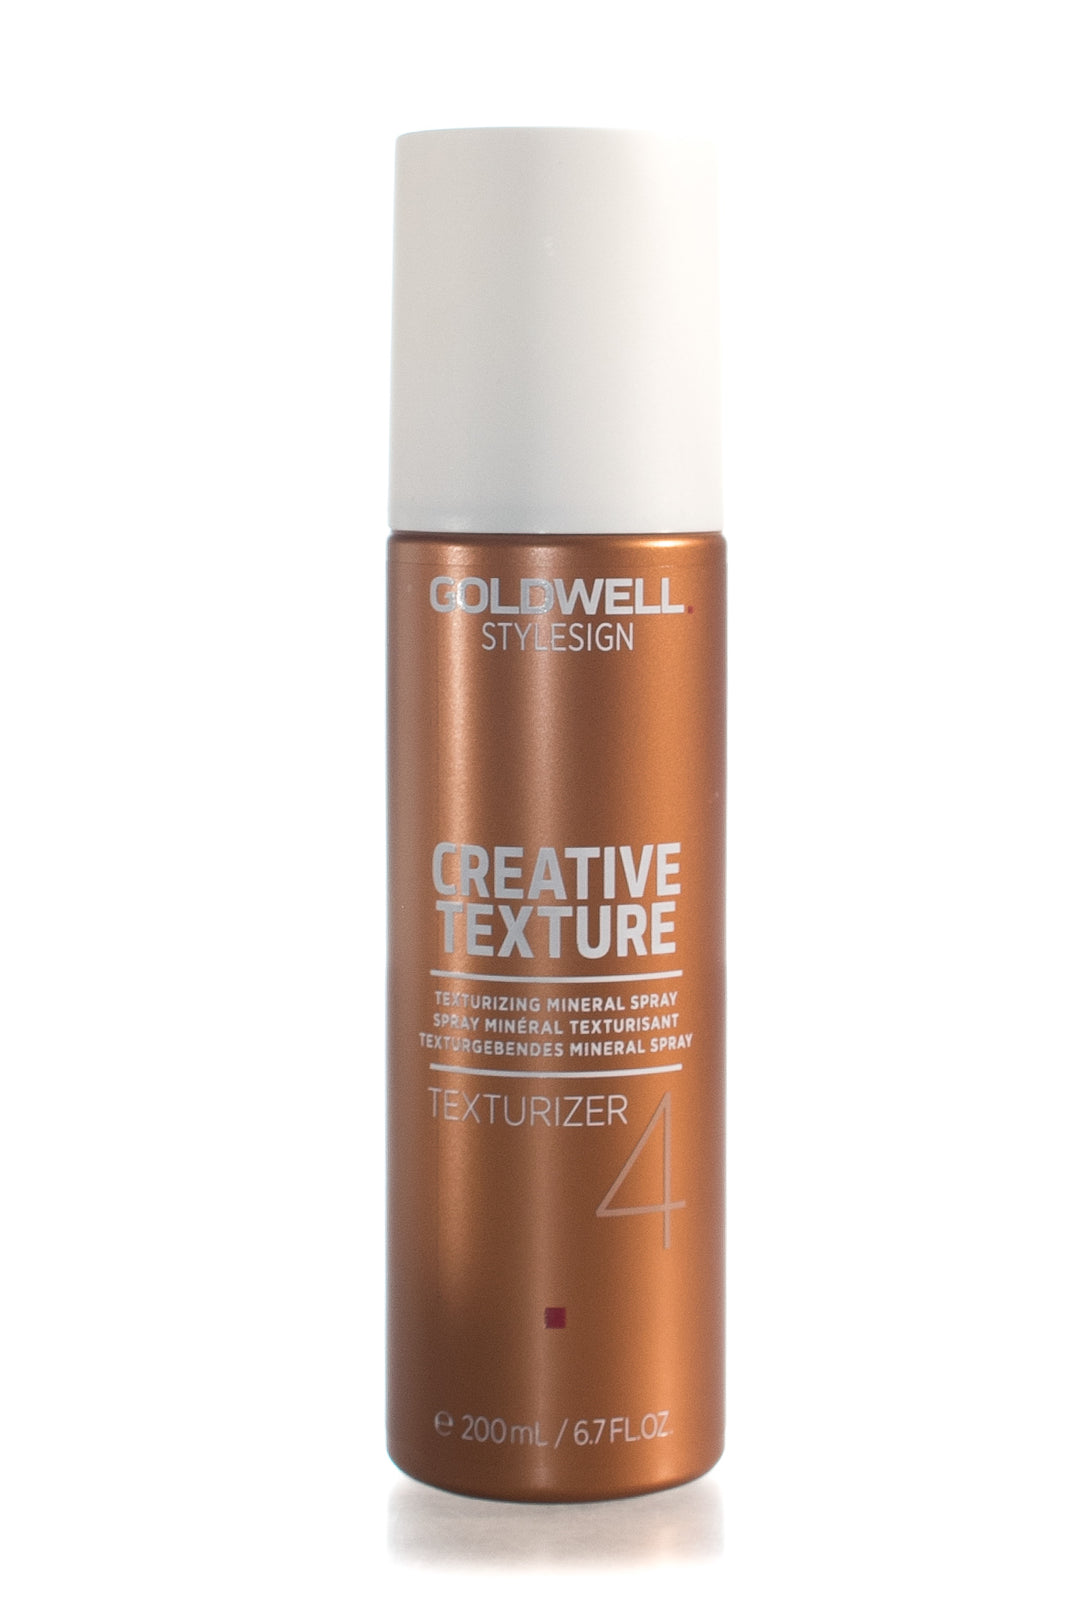 Product Image: Goldwell Creative Texture Texturizer - 200ml